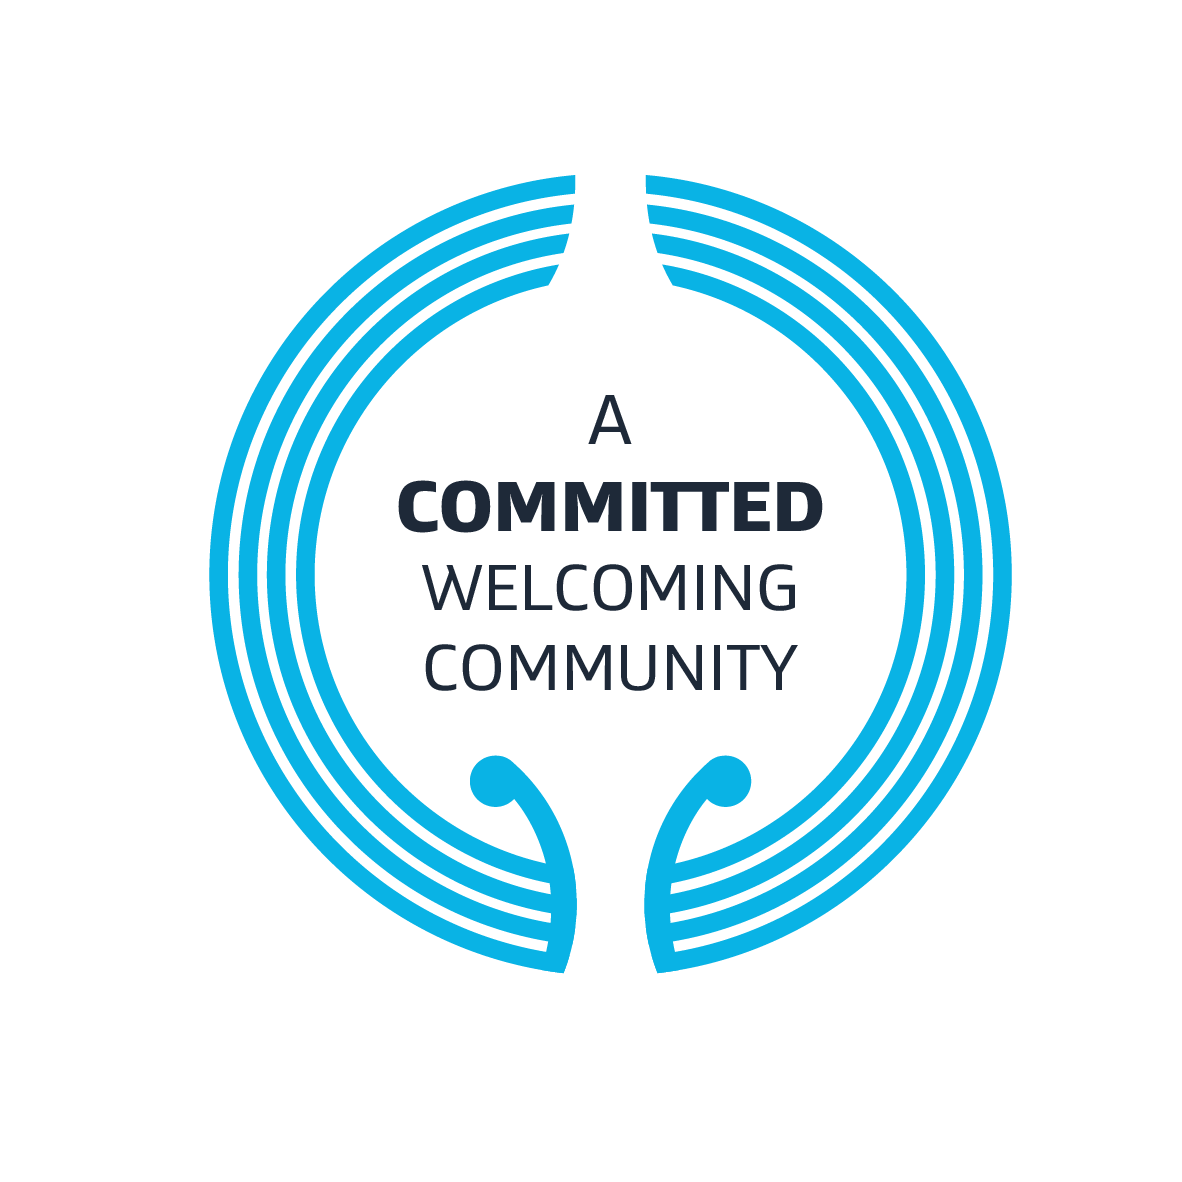 Committed Welcoming Community badge